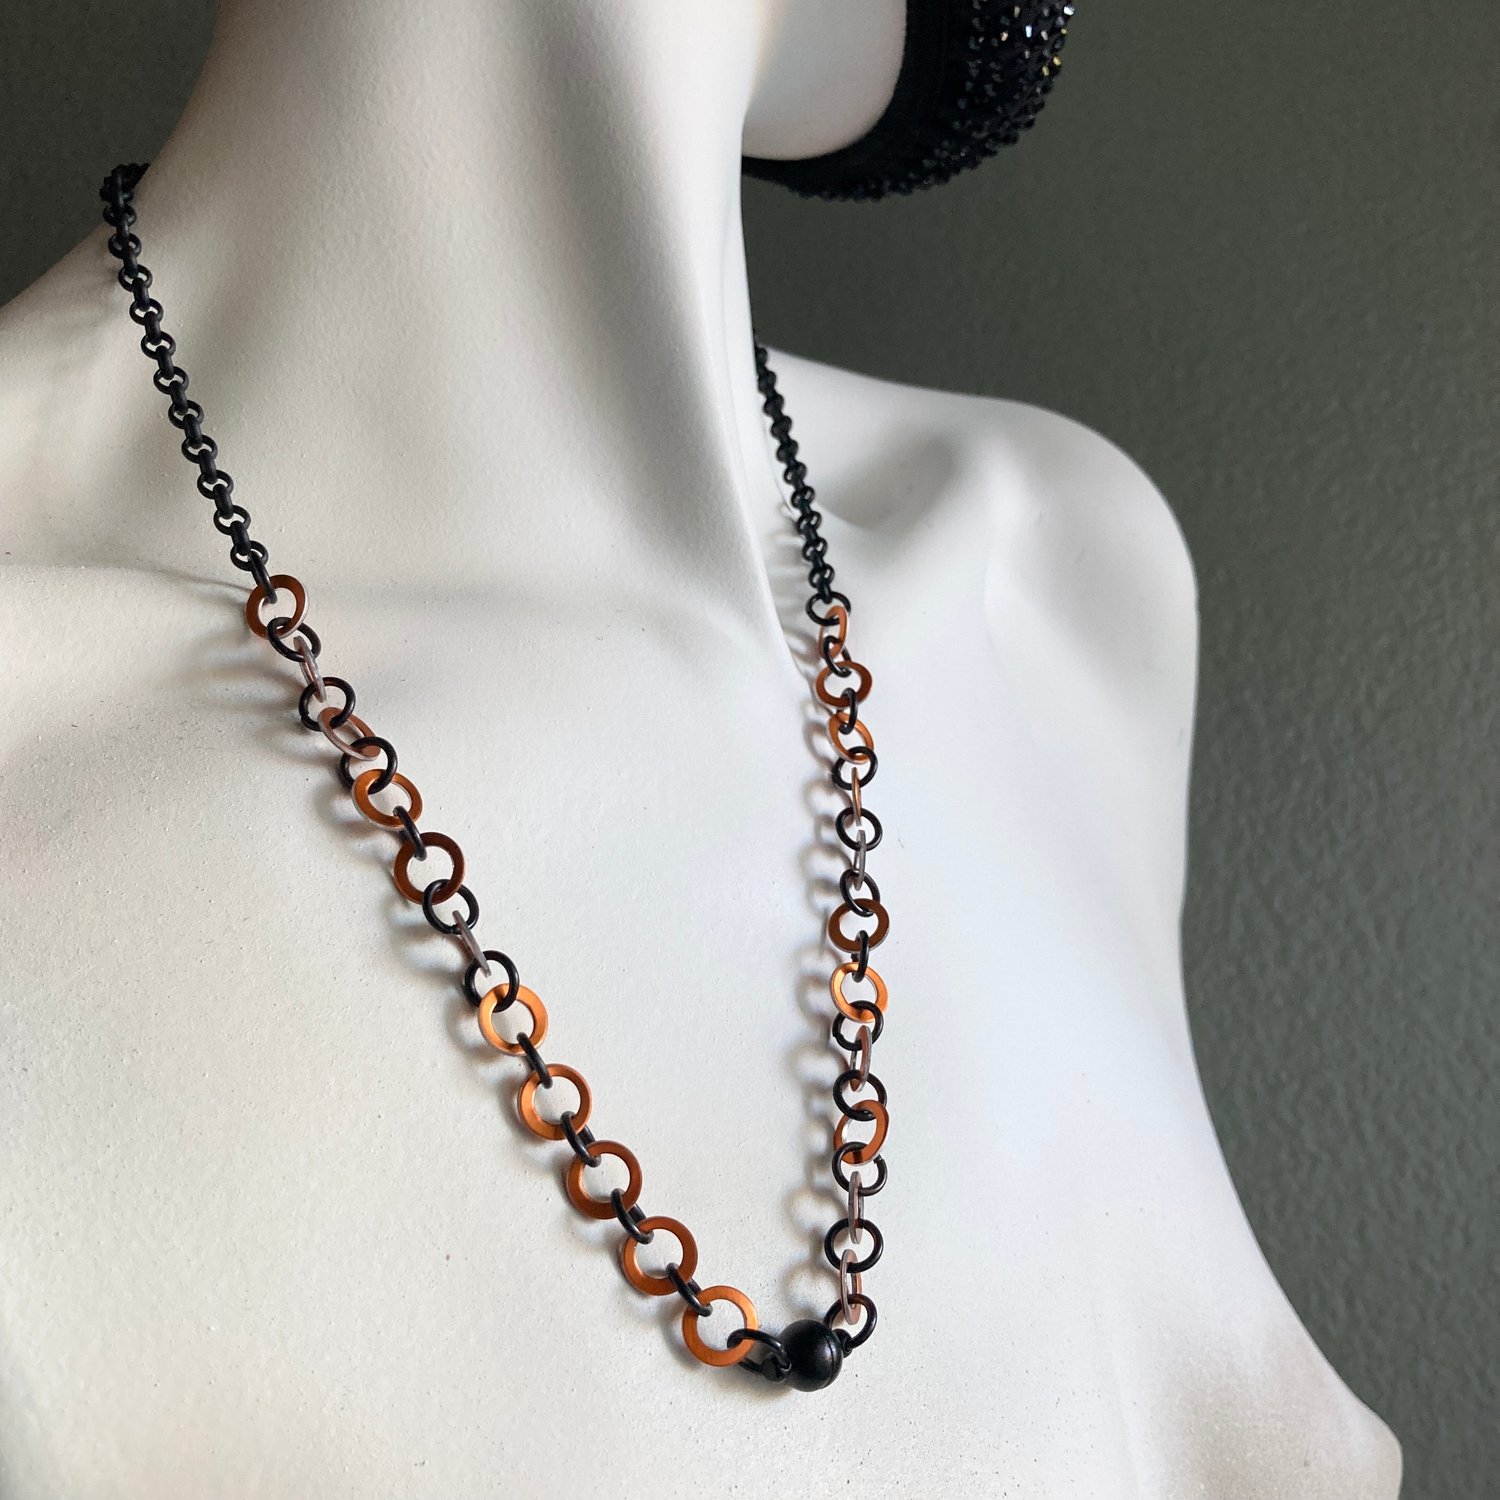 Black Shell Pearl Necklace with Magnetic Clasp - Magnetic Chains - Magnets  - Jewelry